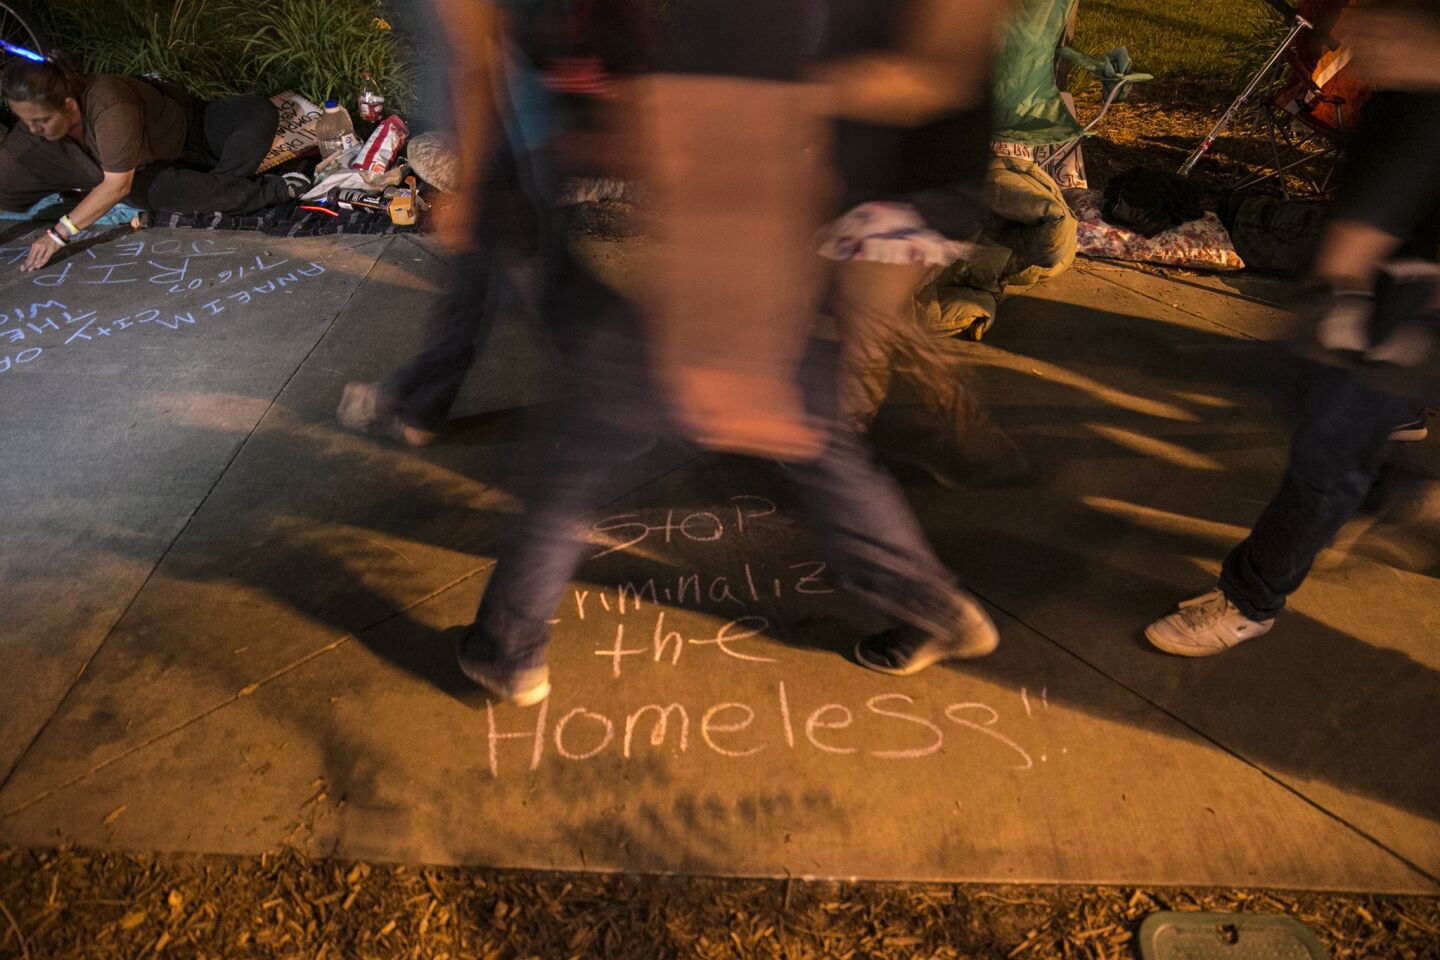 Homeless advocates rally in Anaheim